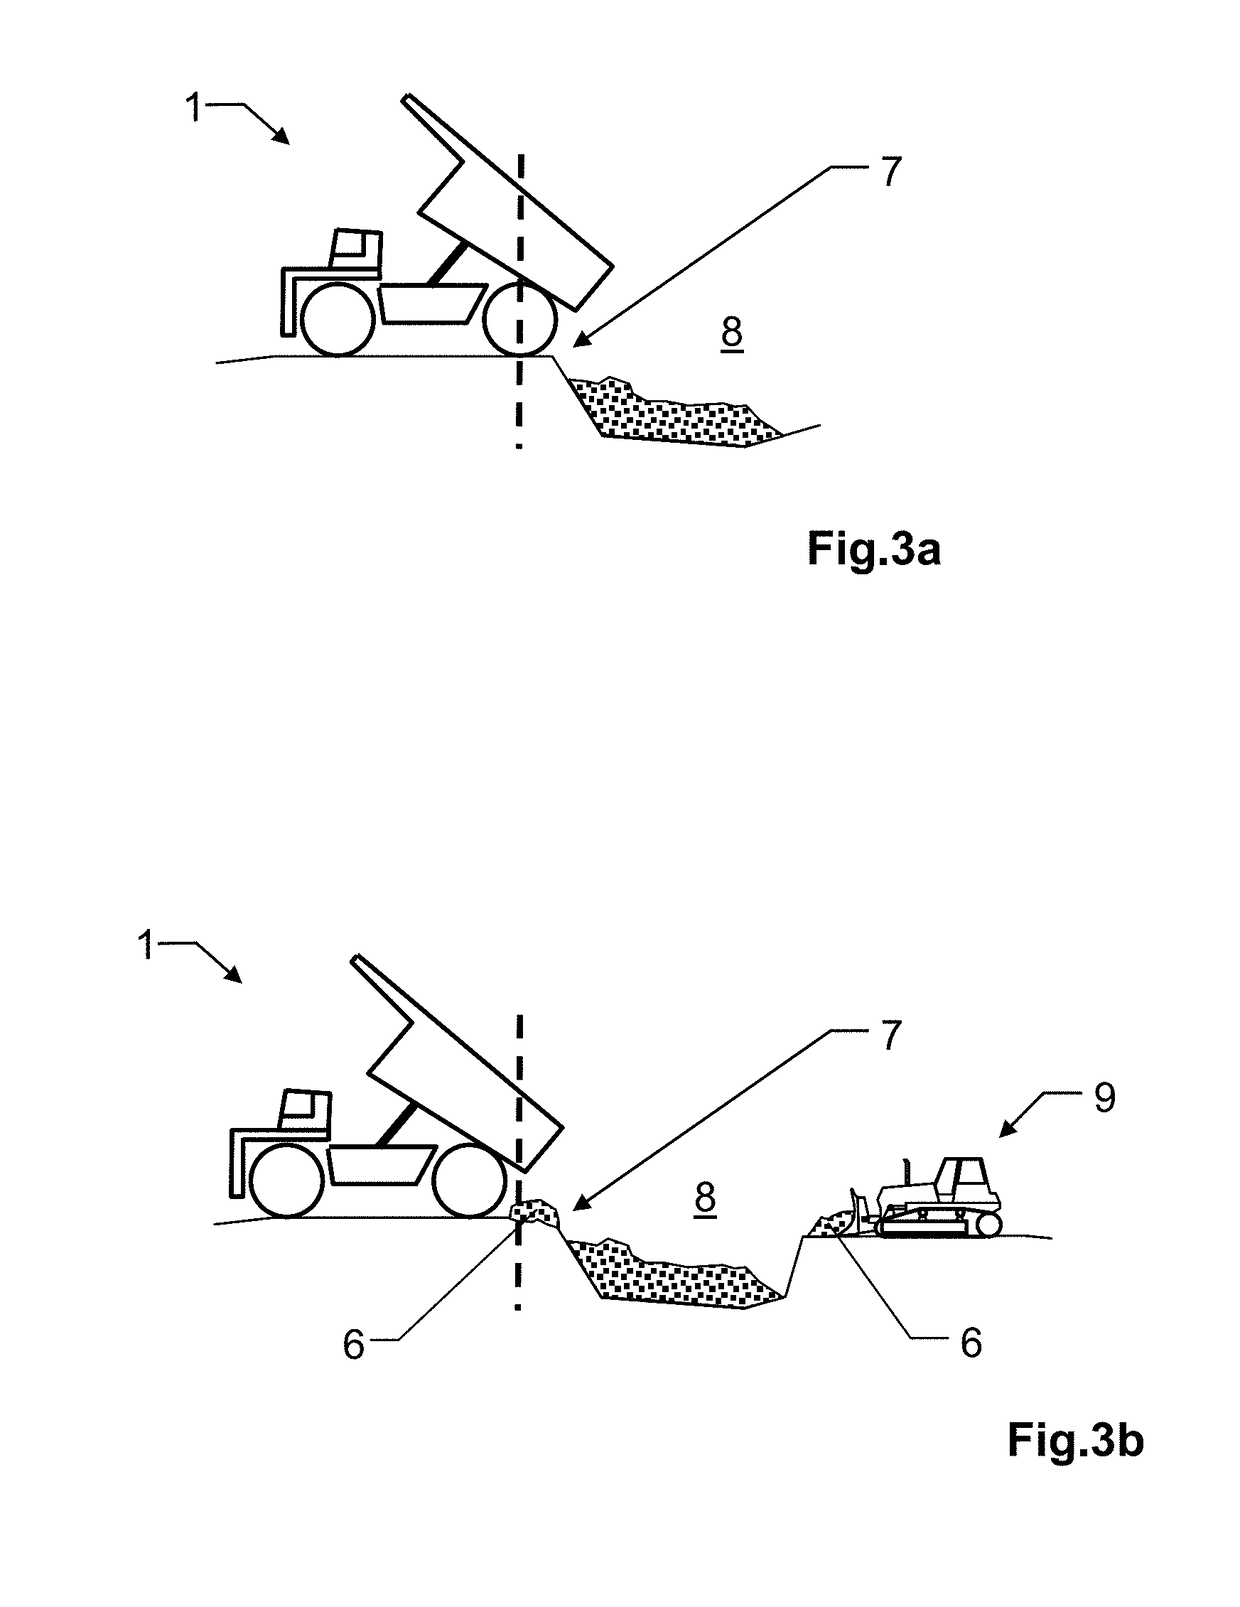 Driving assistance system for reversing a mining haulage vehicle